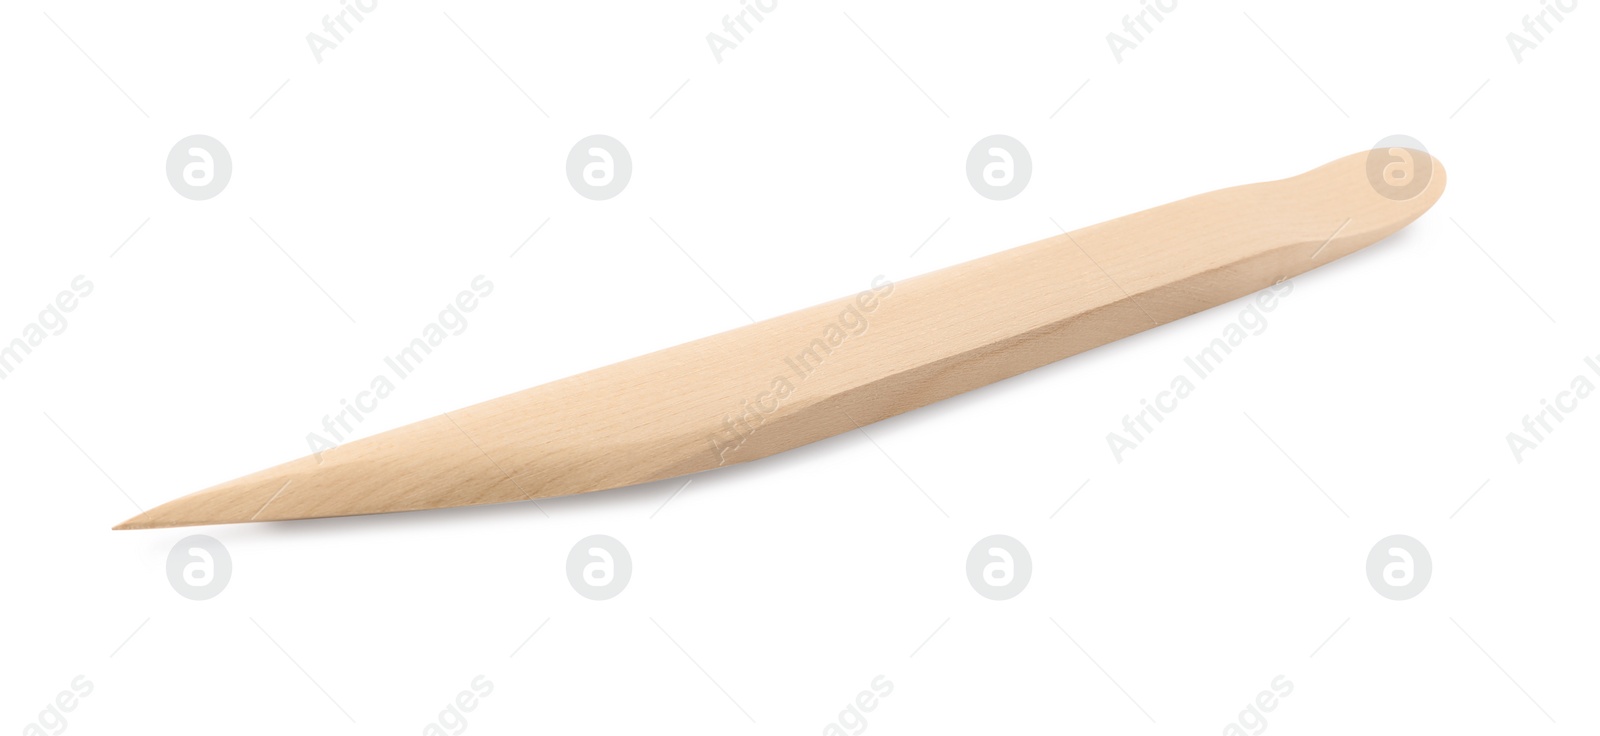 Photo of Wooden tool for clay modeling isolated on white